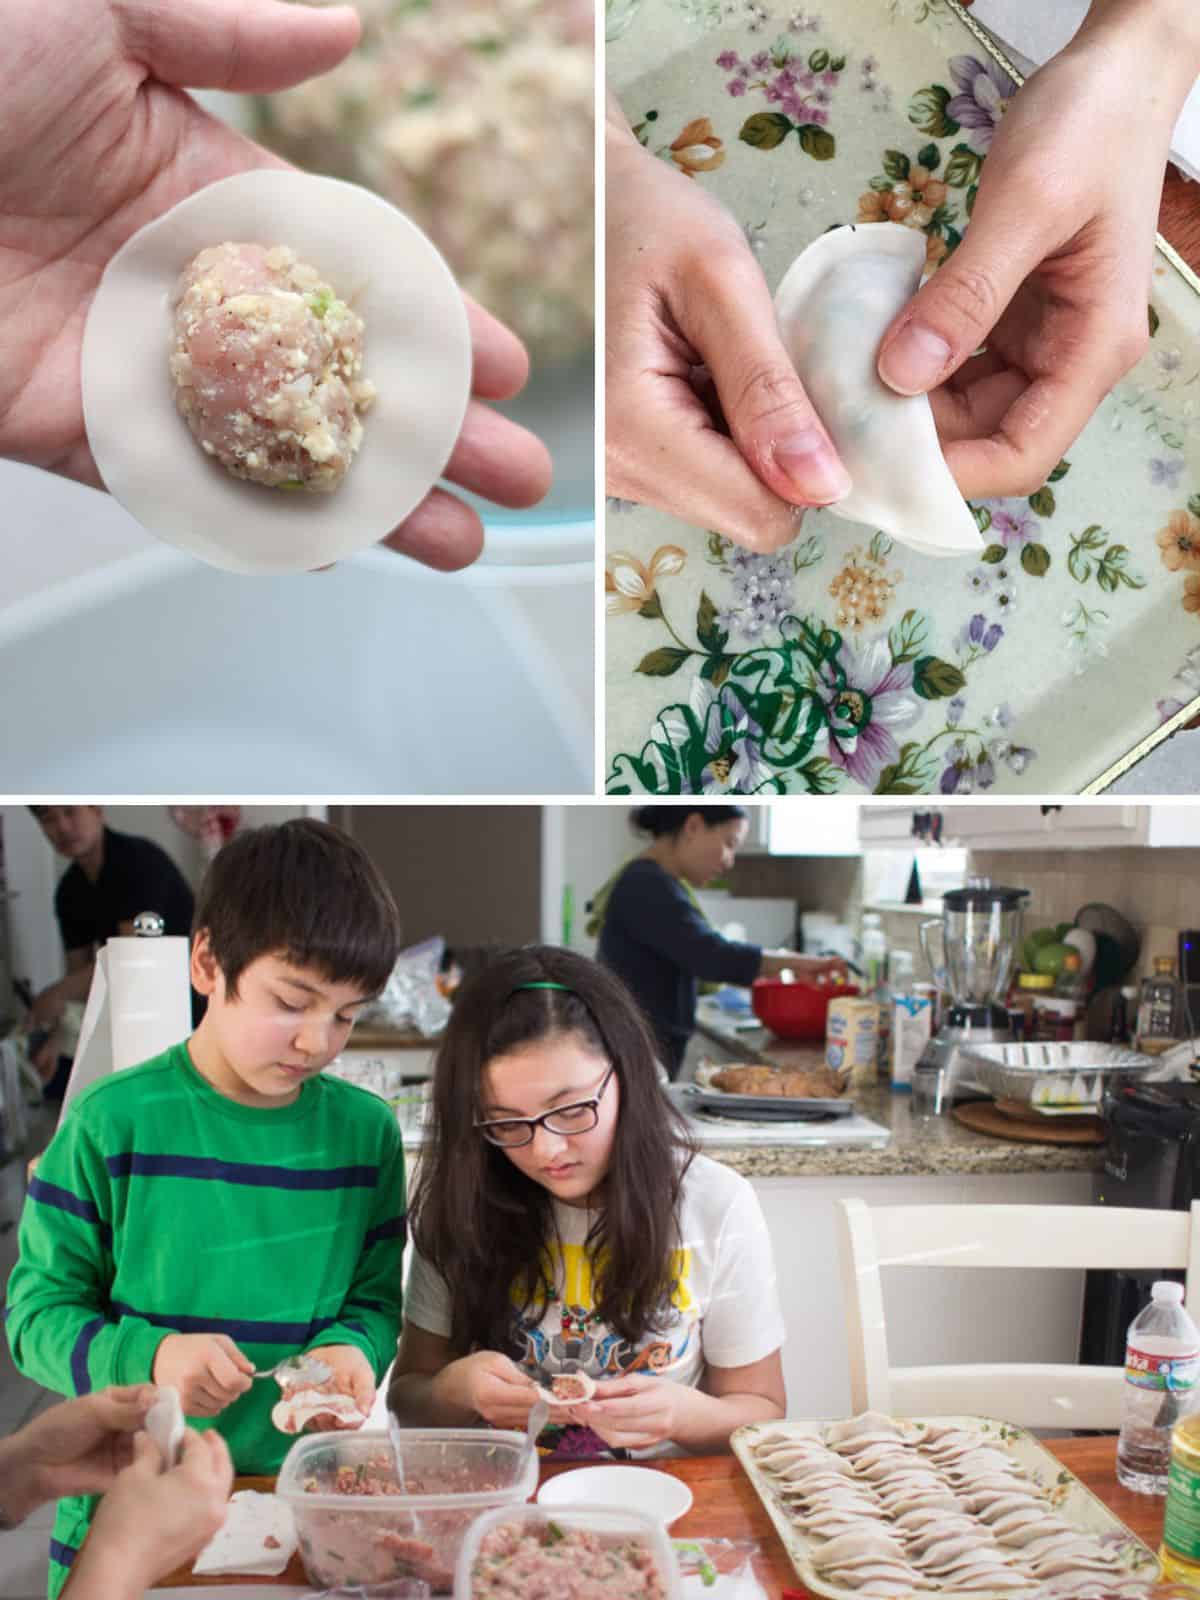 How to fill and shape the dumplings as well as two children making them.